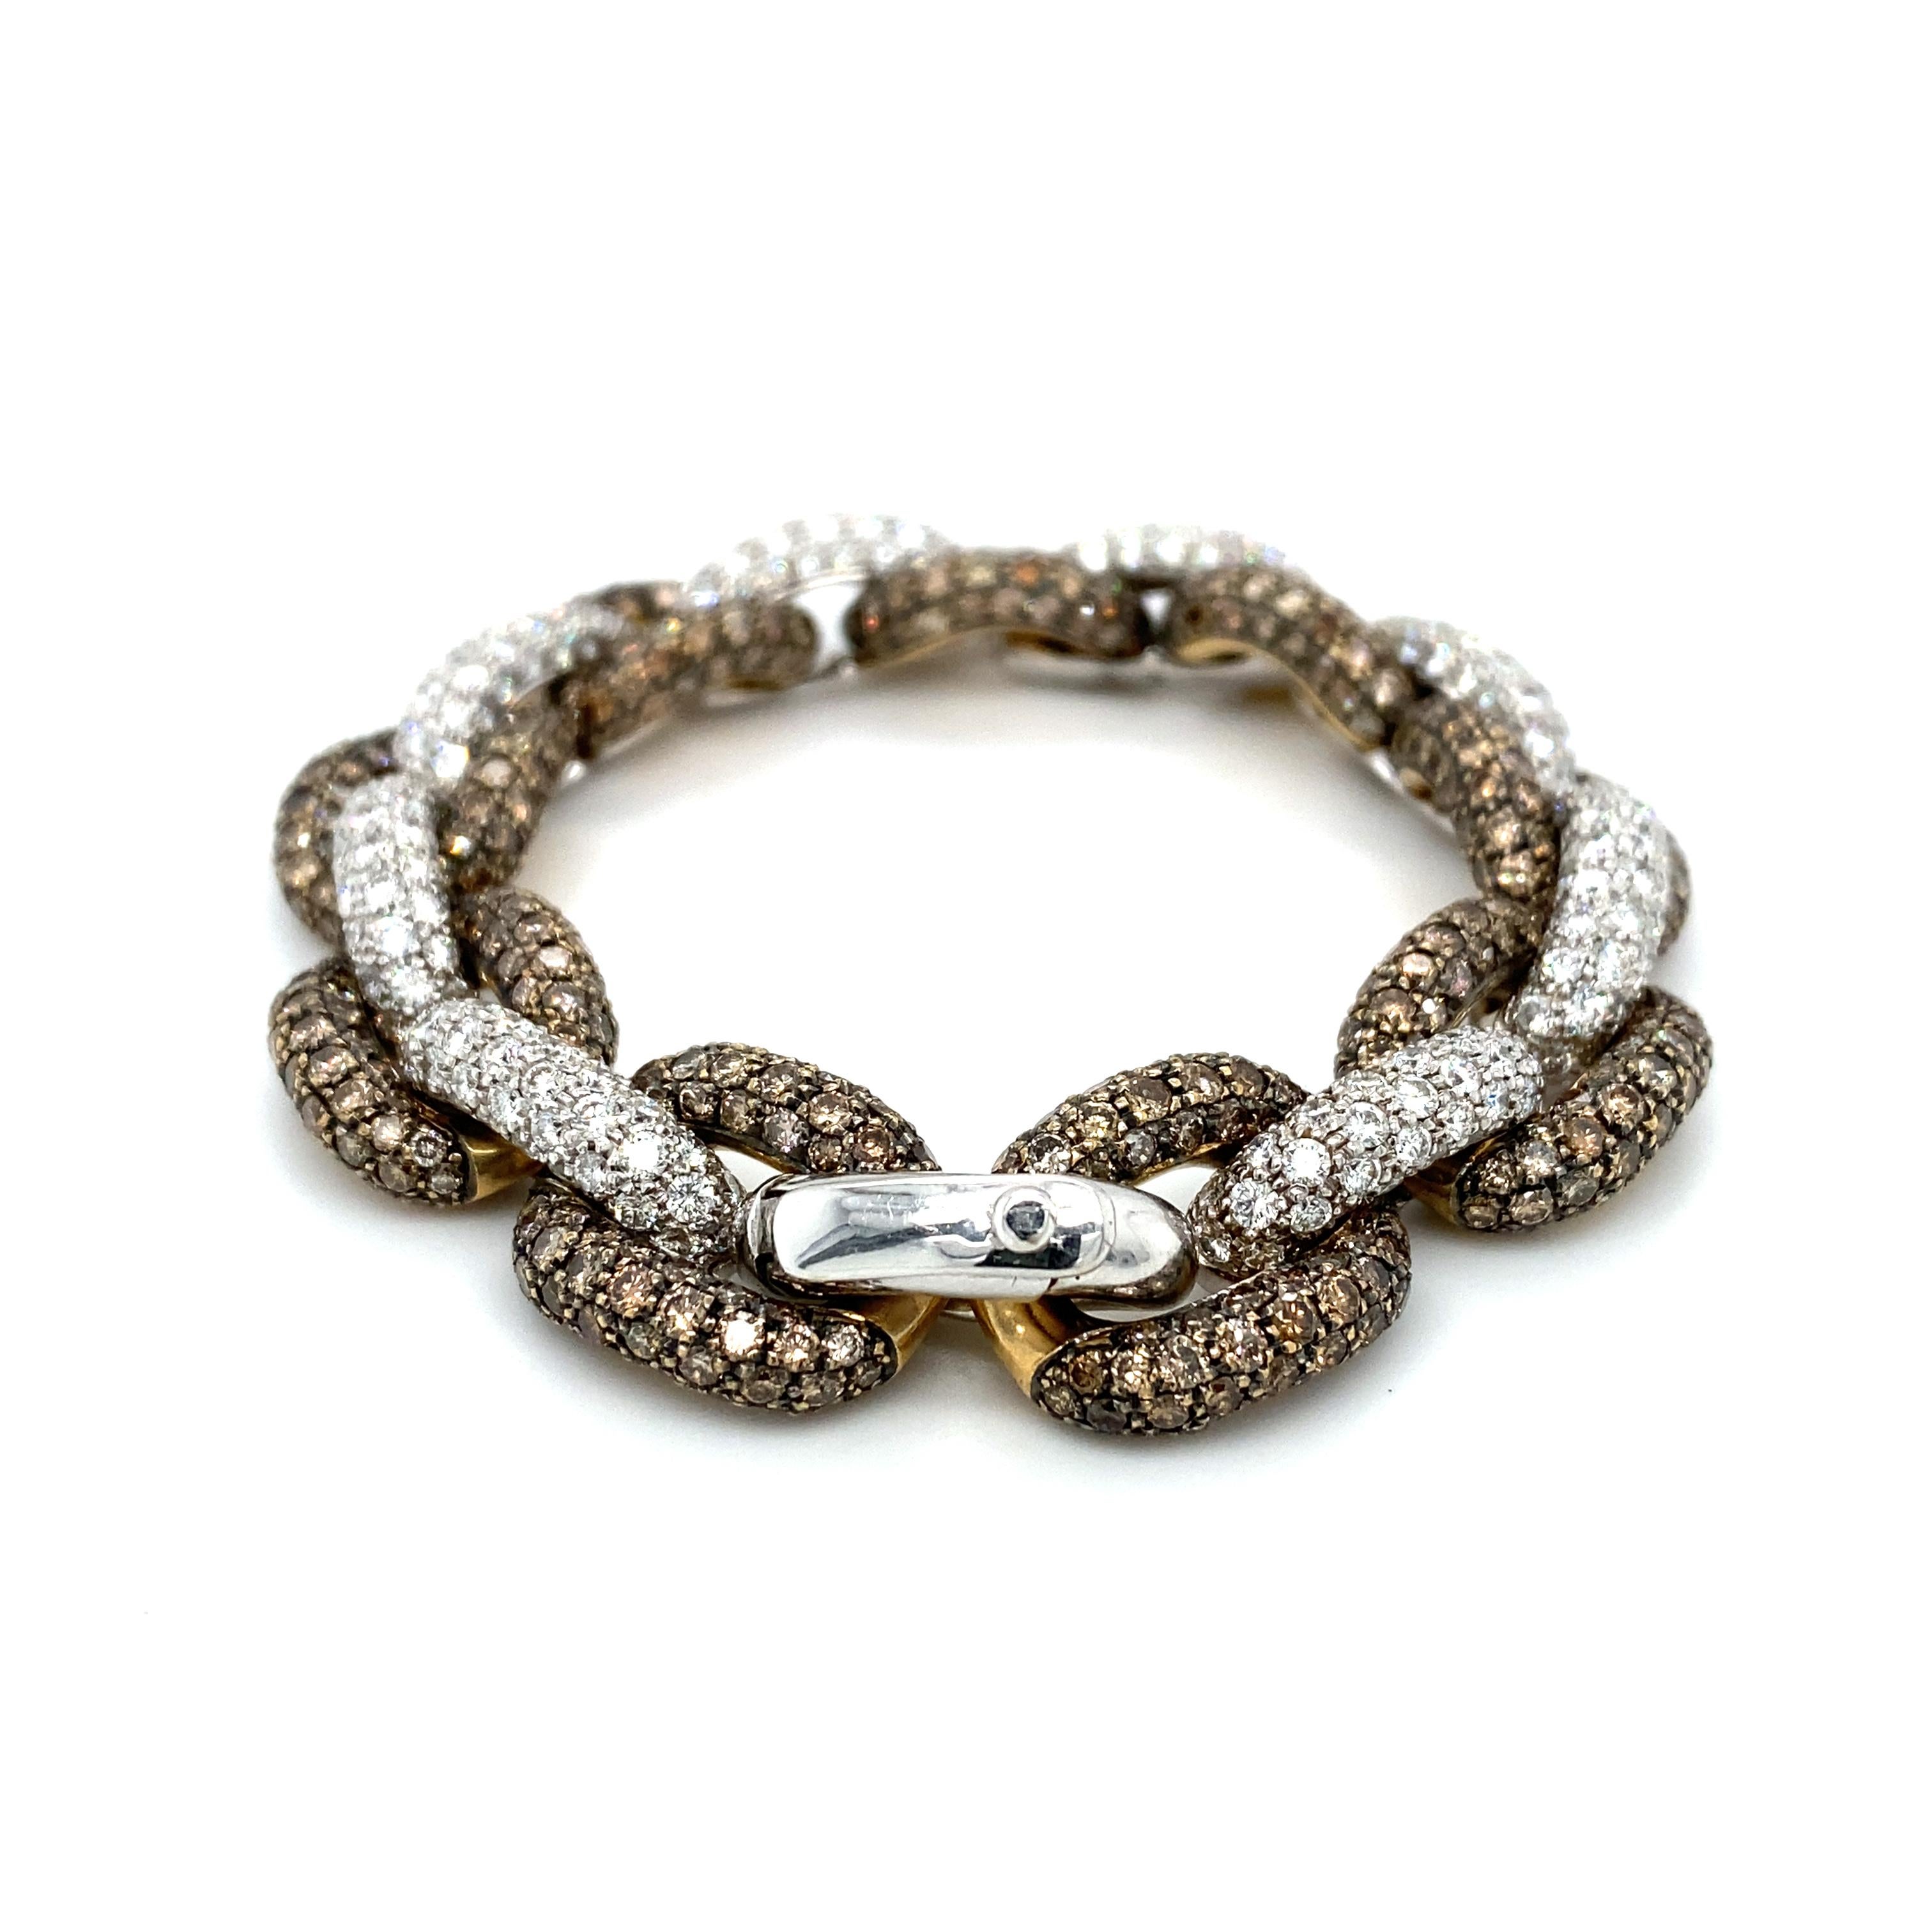 Item Details: This spectacular chain bracelet is studded with brilliant diamonds, both colorless and fancy brown. The total carat weight is over 20.0 carats. This bracelet is an excellent statement piece and the craftsmanship is impeccable.

Circa: